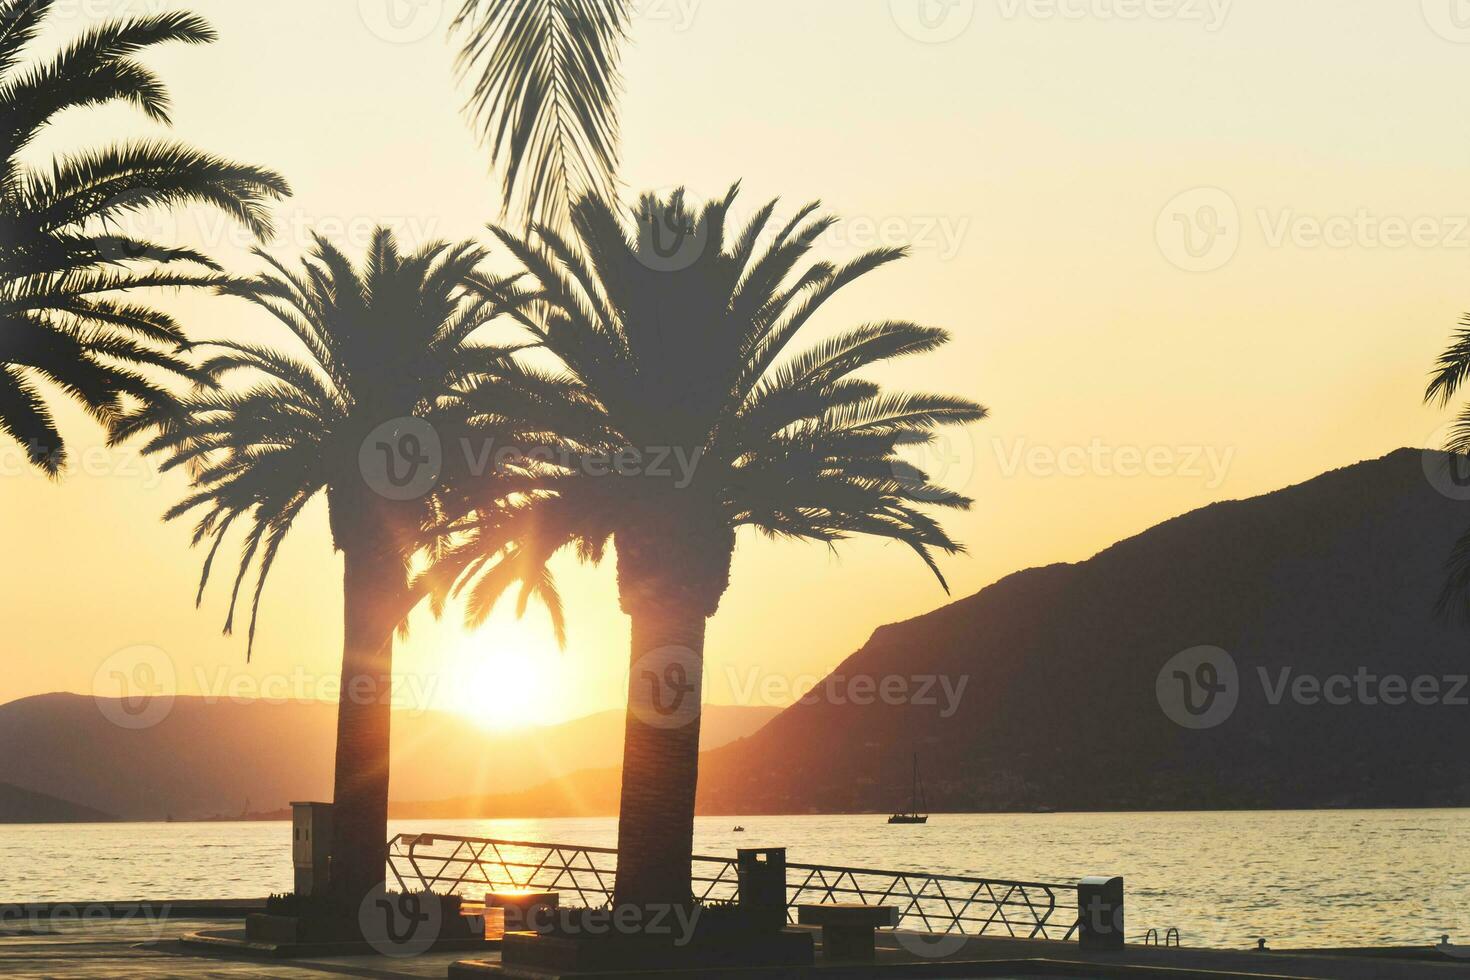 Sunset over Palm trees photo